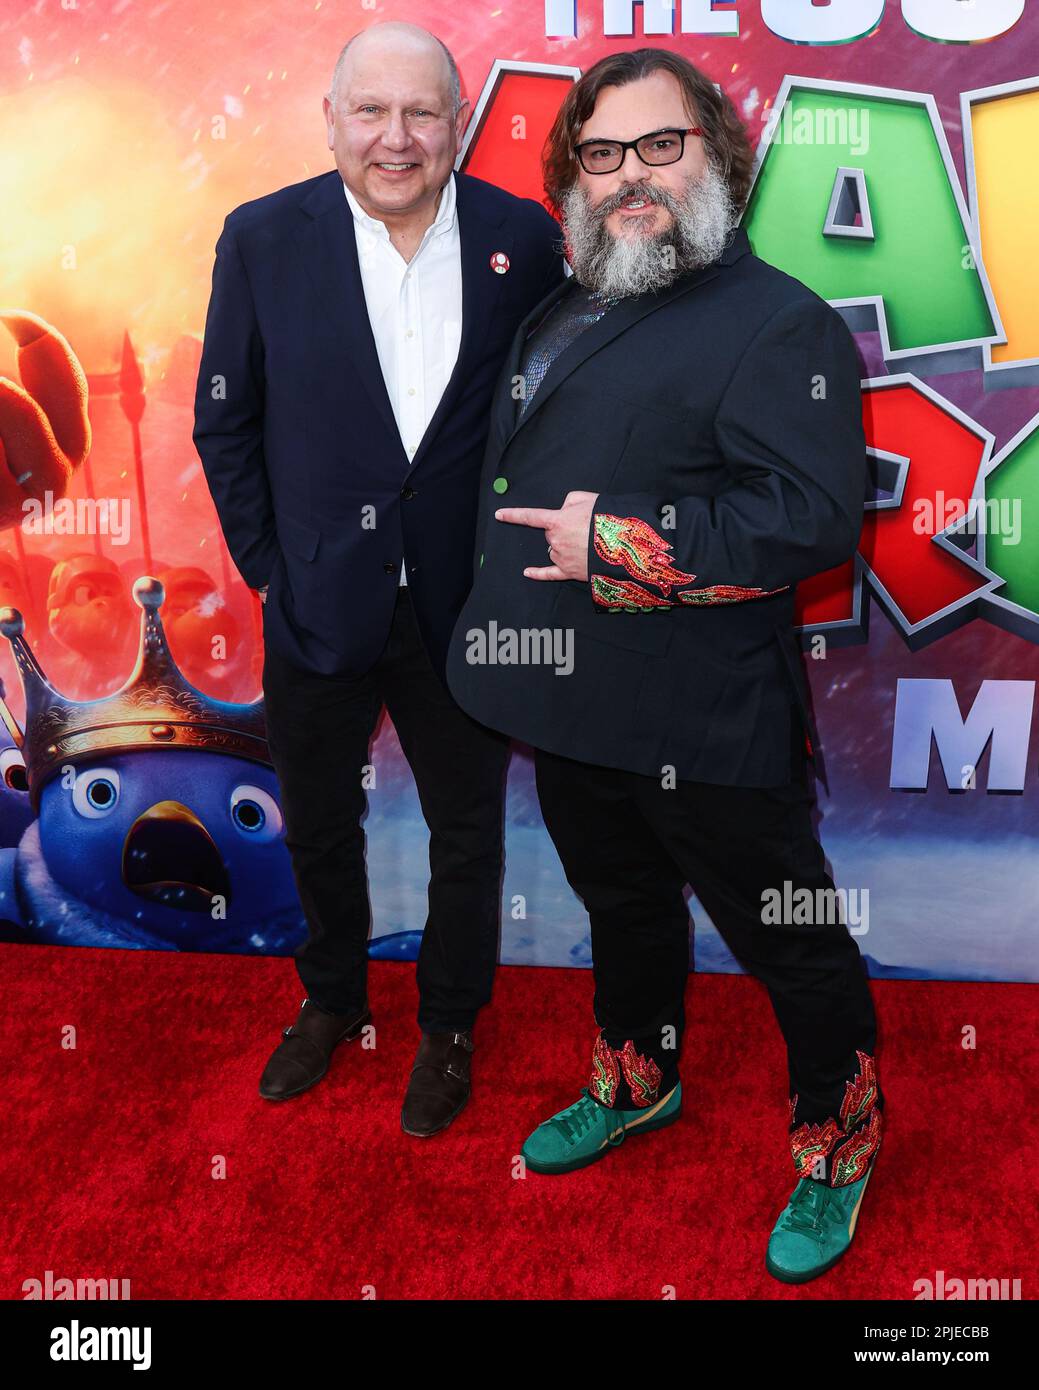 LOS ANGELES, CALIFORNIA, USA - APRIL 01: Chris Meledandri and Jack Black arrive at the Los Angeles Special Screening Of Universal Pictures, Nintendo And Illumination Entertainment's 'The Super Mario Bros. Movie' held at the Regal Cinemas LA Live & 4DX Movie on April 1, 2023 in Los Angeles, California, United States. (Photo by Xavier Collin/Image Press Agency) Stock Photo